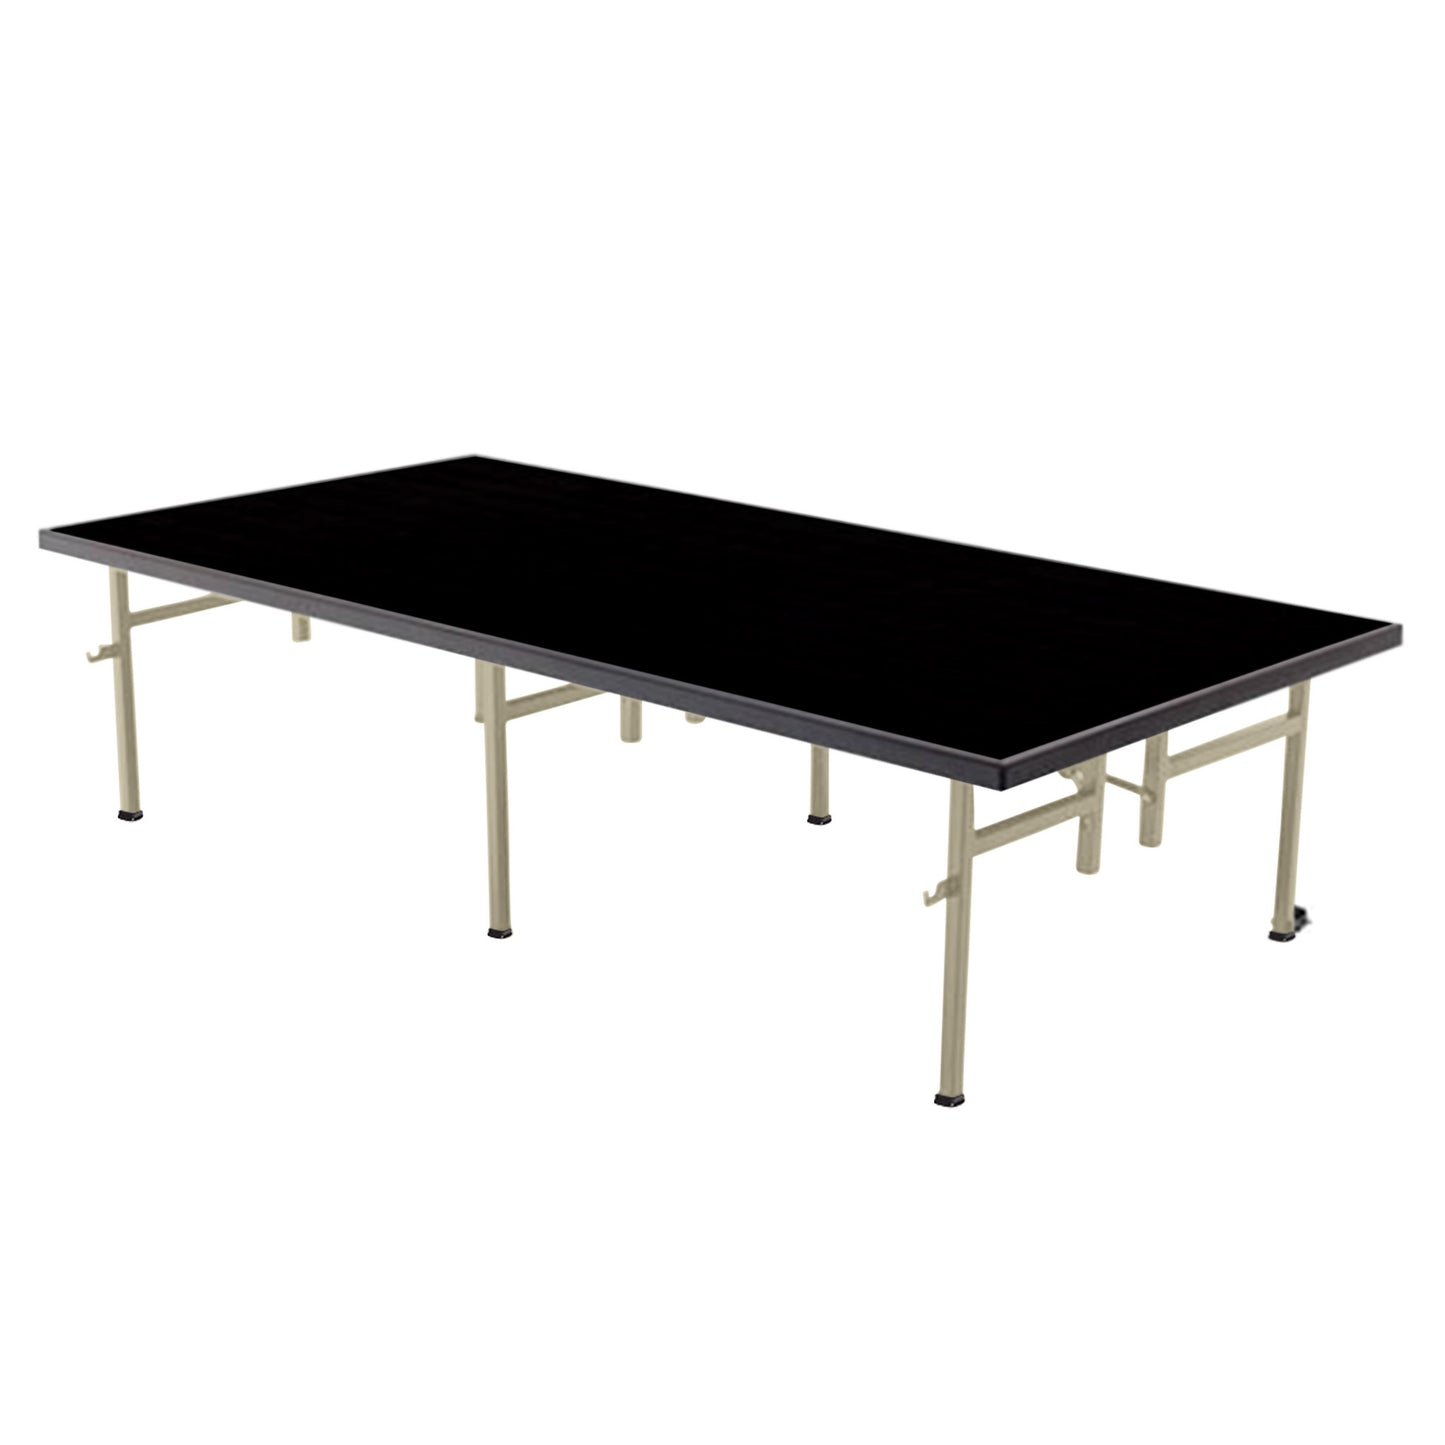 AmTab Fixed Height Stage - Polypropylene Top - 48"W x 48"L x 8"H  (AmTab AMT-ST4408P)